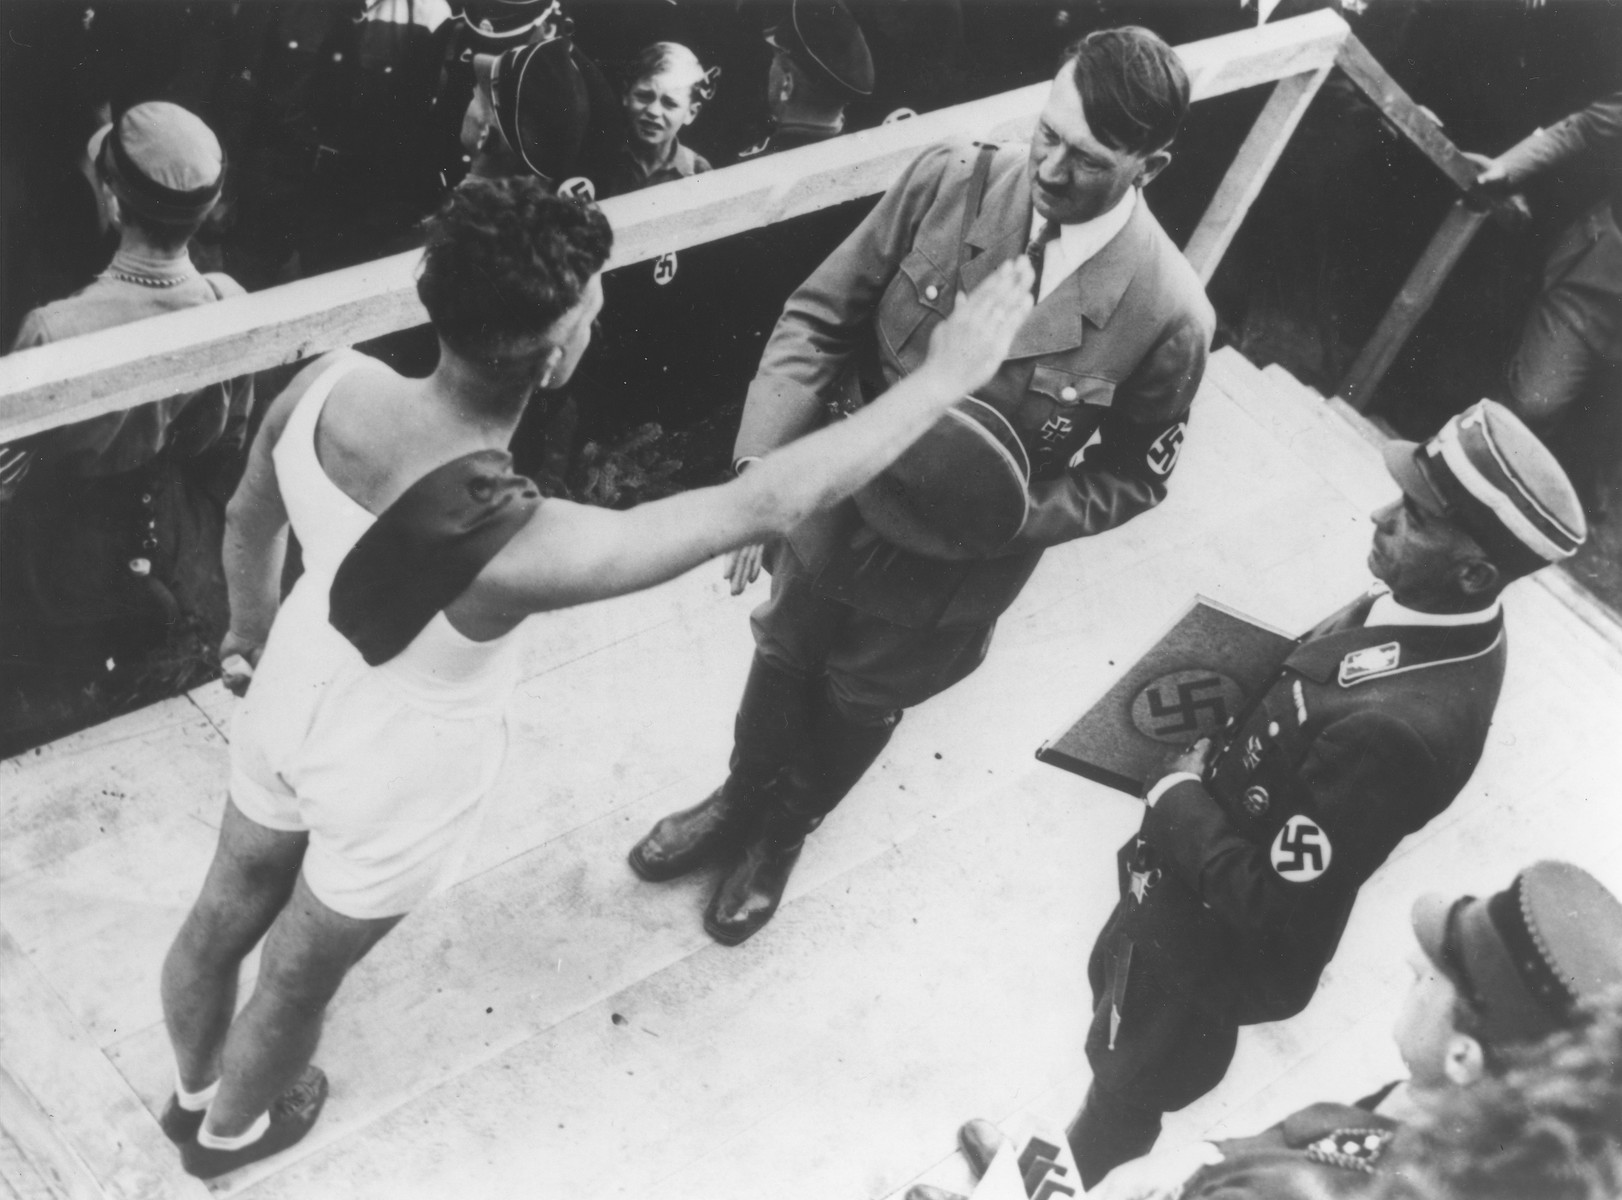 An athlete salutes Hitler at a ceremony to demonstrate loyaty to the Saar district at the Ehrenbreitstein fortress in Koblenz.   

Reich sports leader Hans von Tschammer und Osten (right) is about to present the athlete's message of loyalty to Hitler.